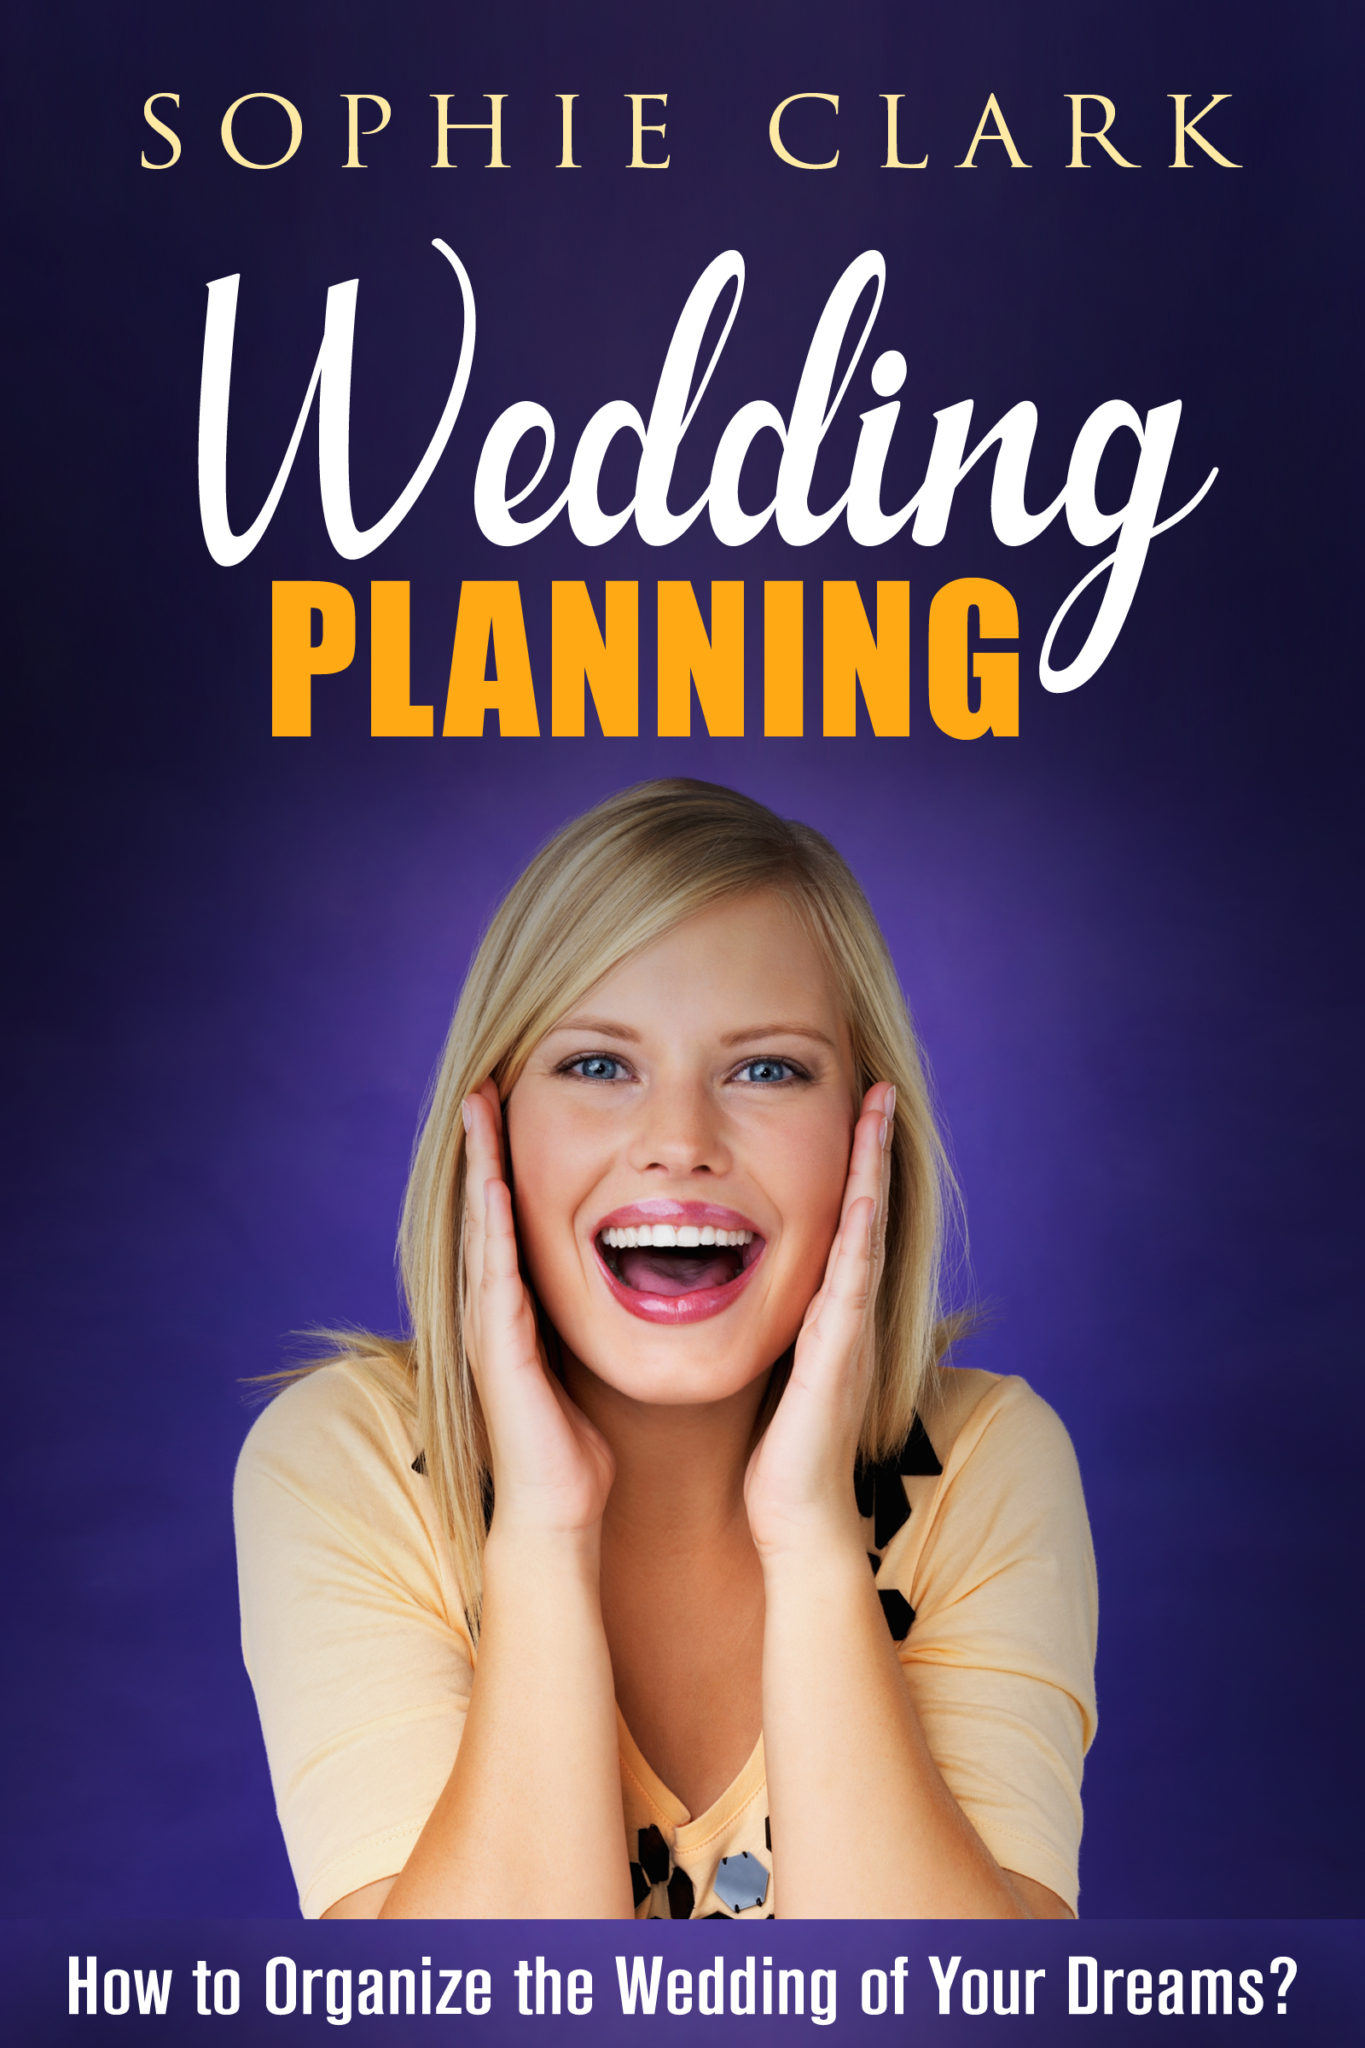 FREE: Wedding Planning: How to Organize the Wedding of Your Dreams by Sophie Clark